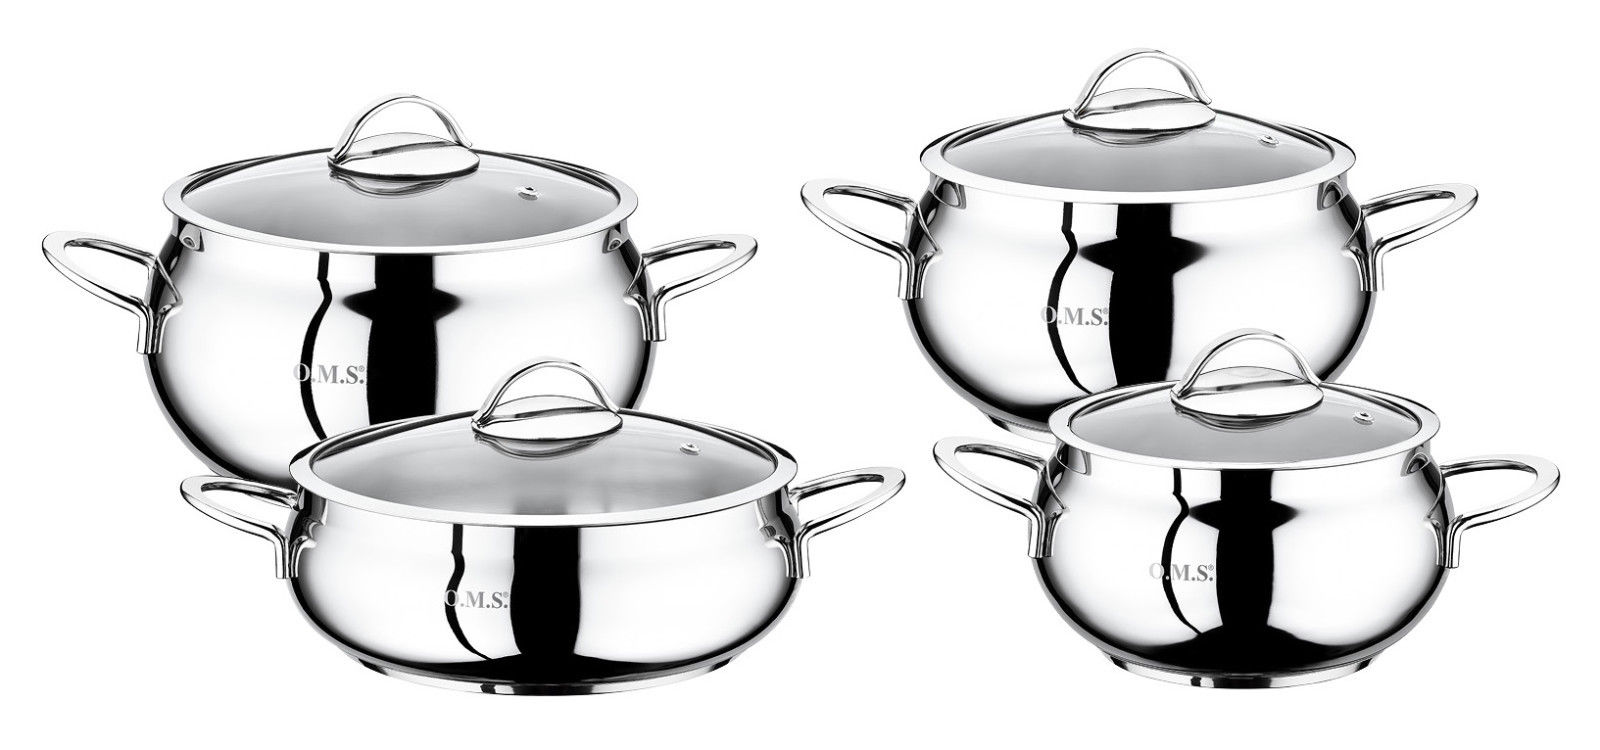 O.M.S. 8 Piece Commercial Professional Cookware Stock Pots 18/10 S/Steel 1006